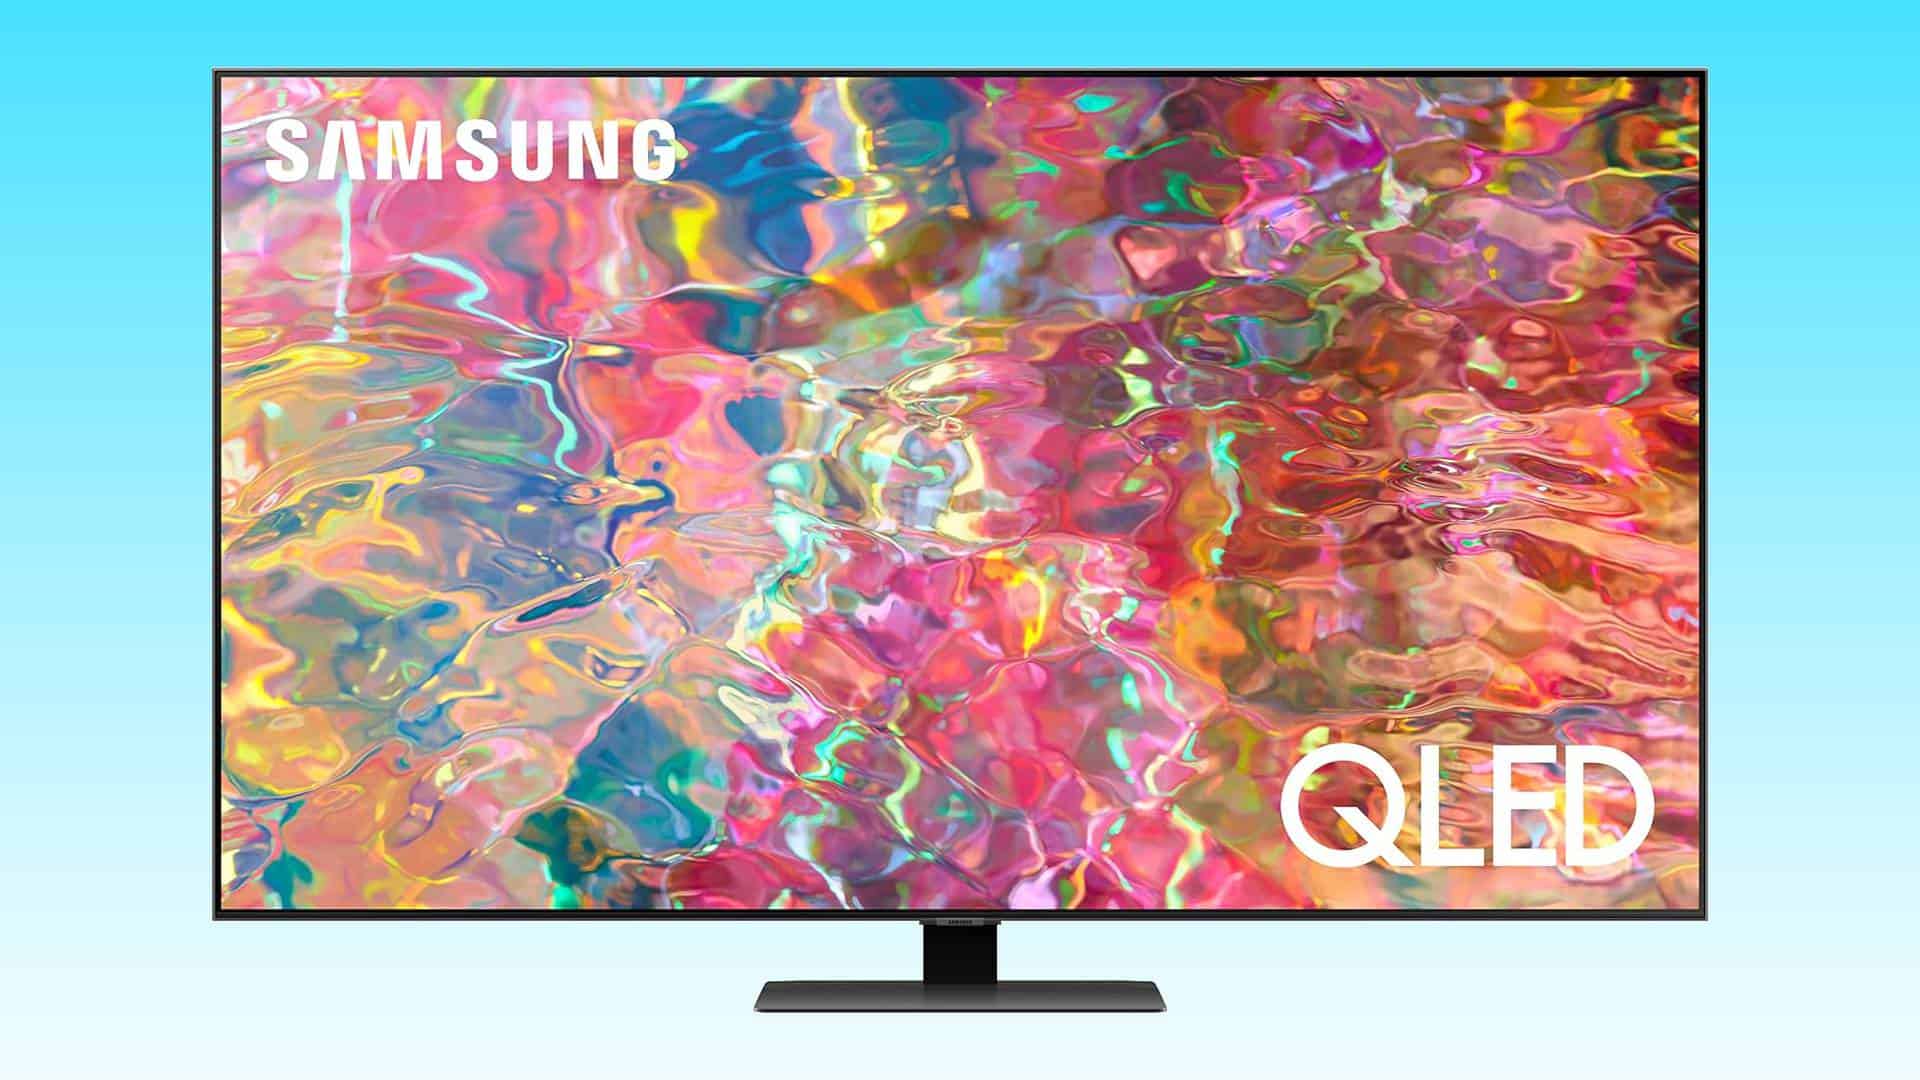 A Samsung 55 inch QLED TV displaying vibrant, abstract colors, now under $1000 in a pre-Easter Amazon deal.